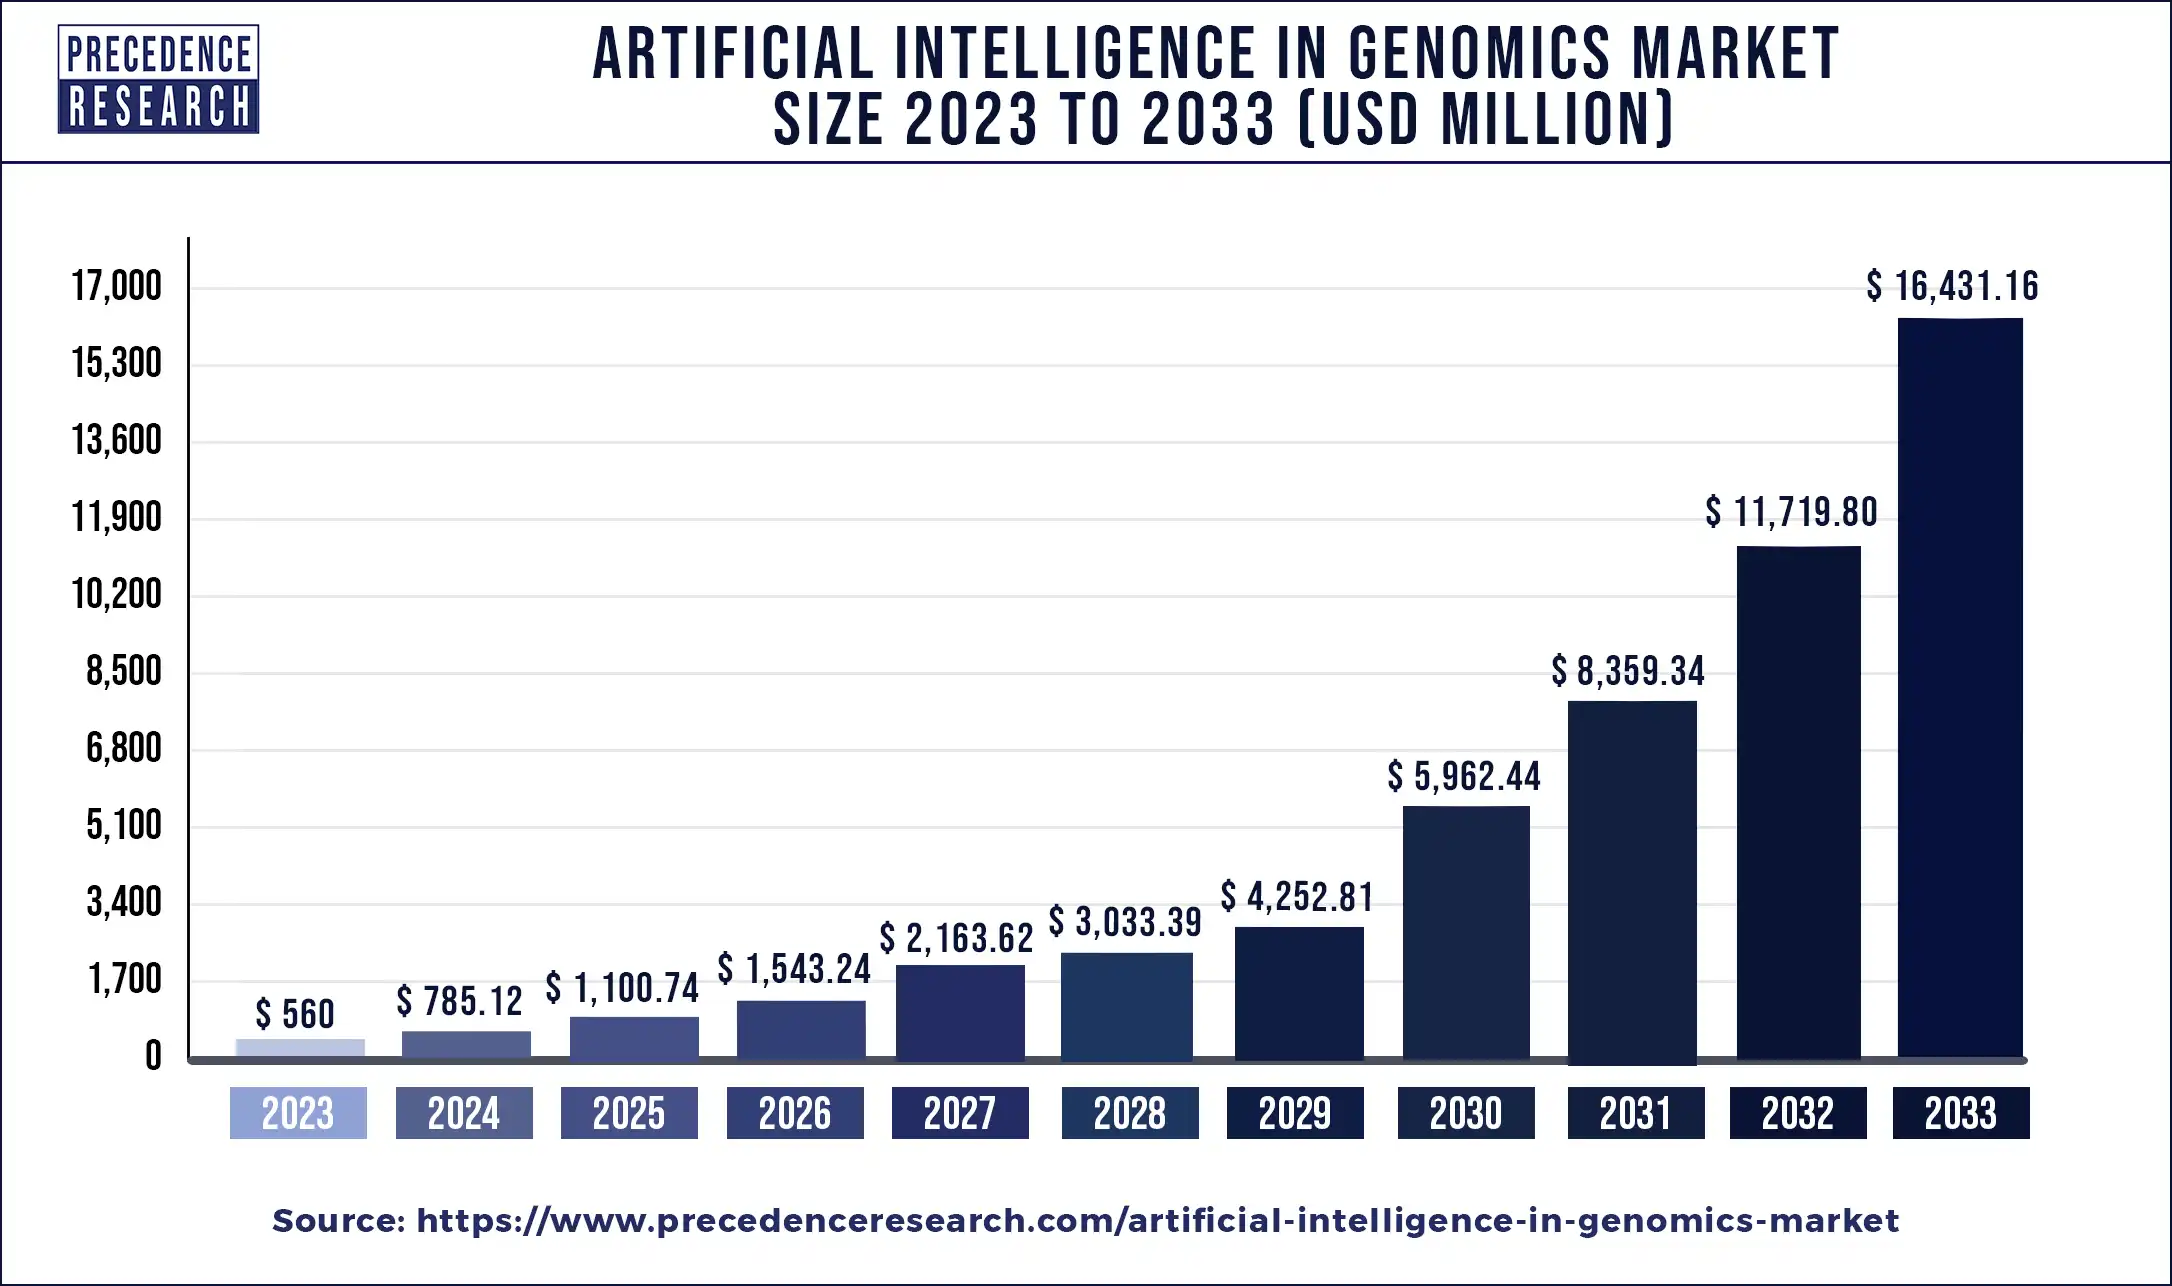 Artificial Intelligence in Genomics Market Size 2024 to 2033